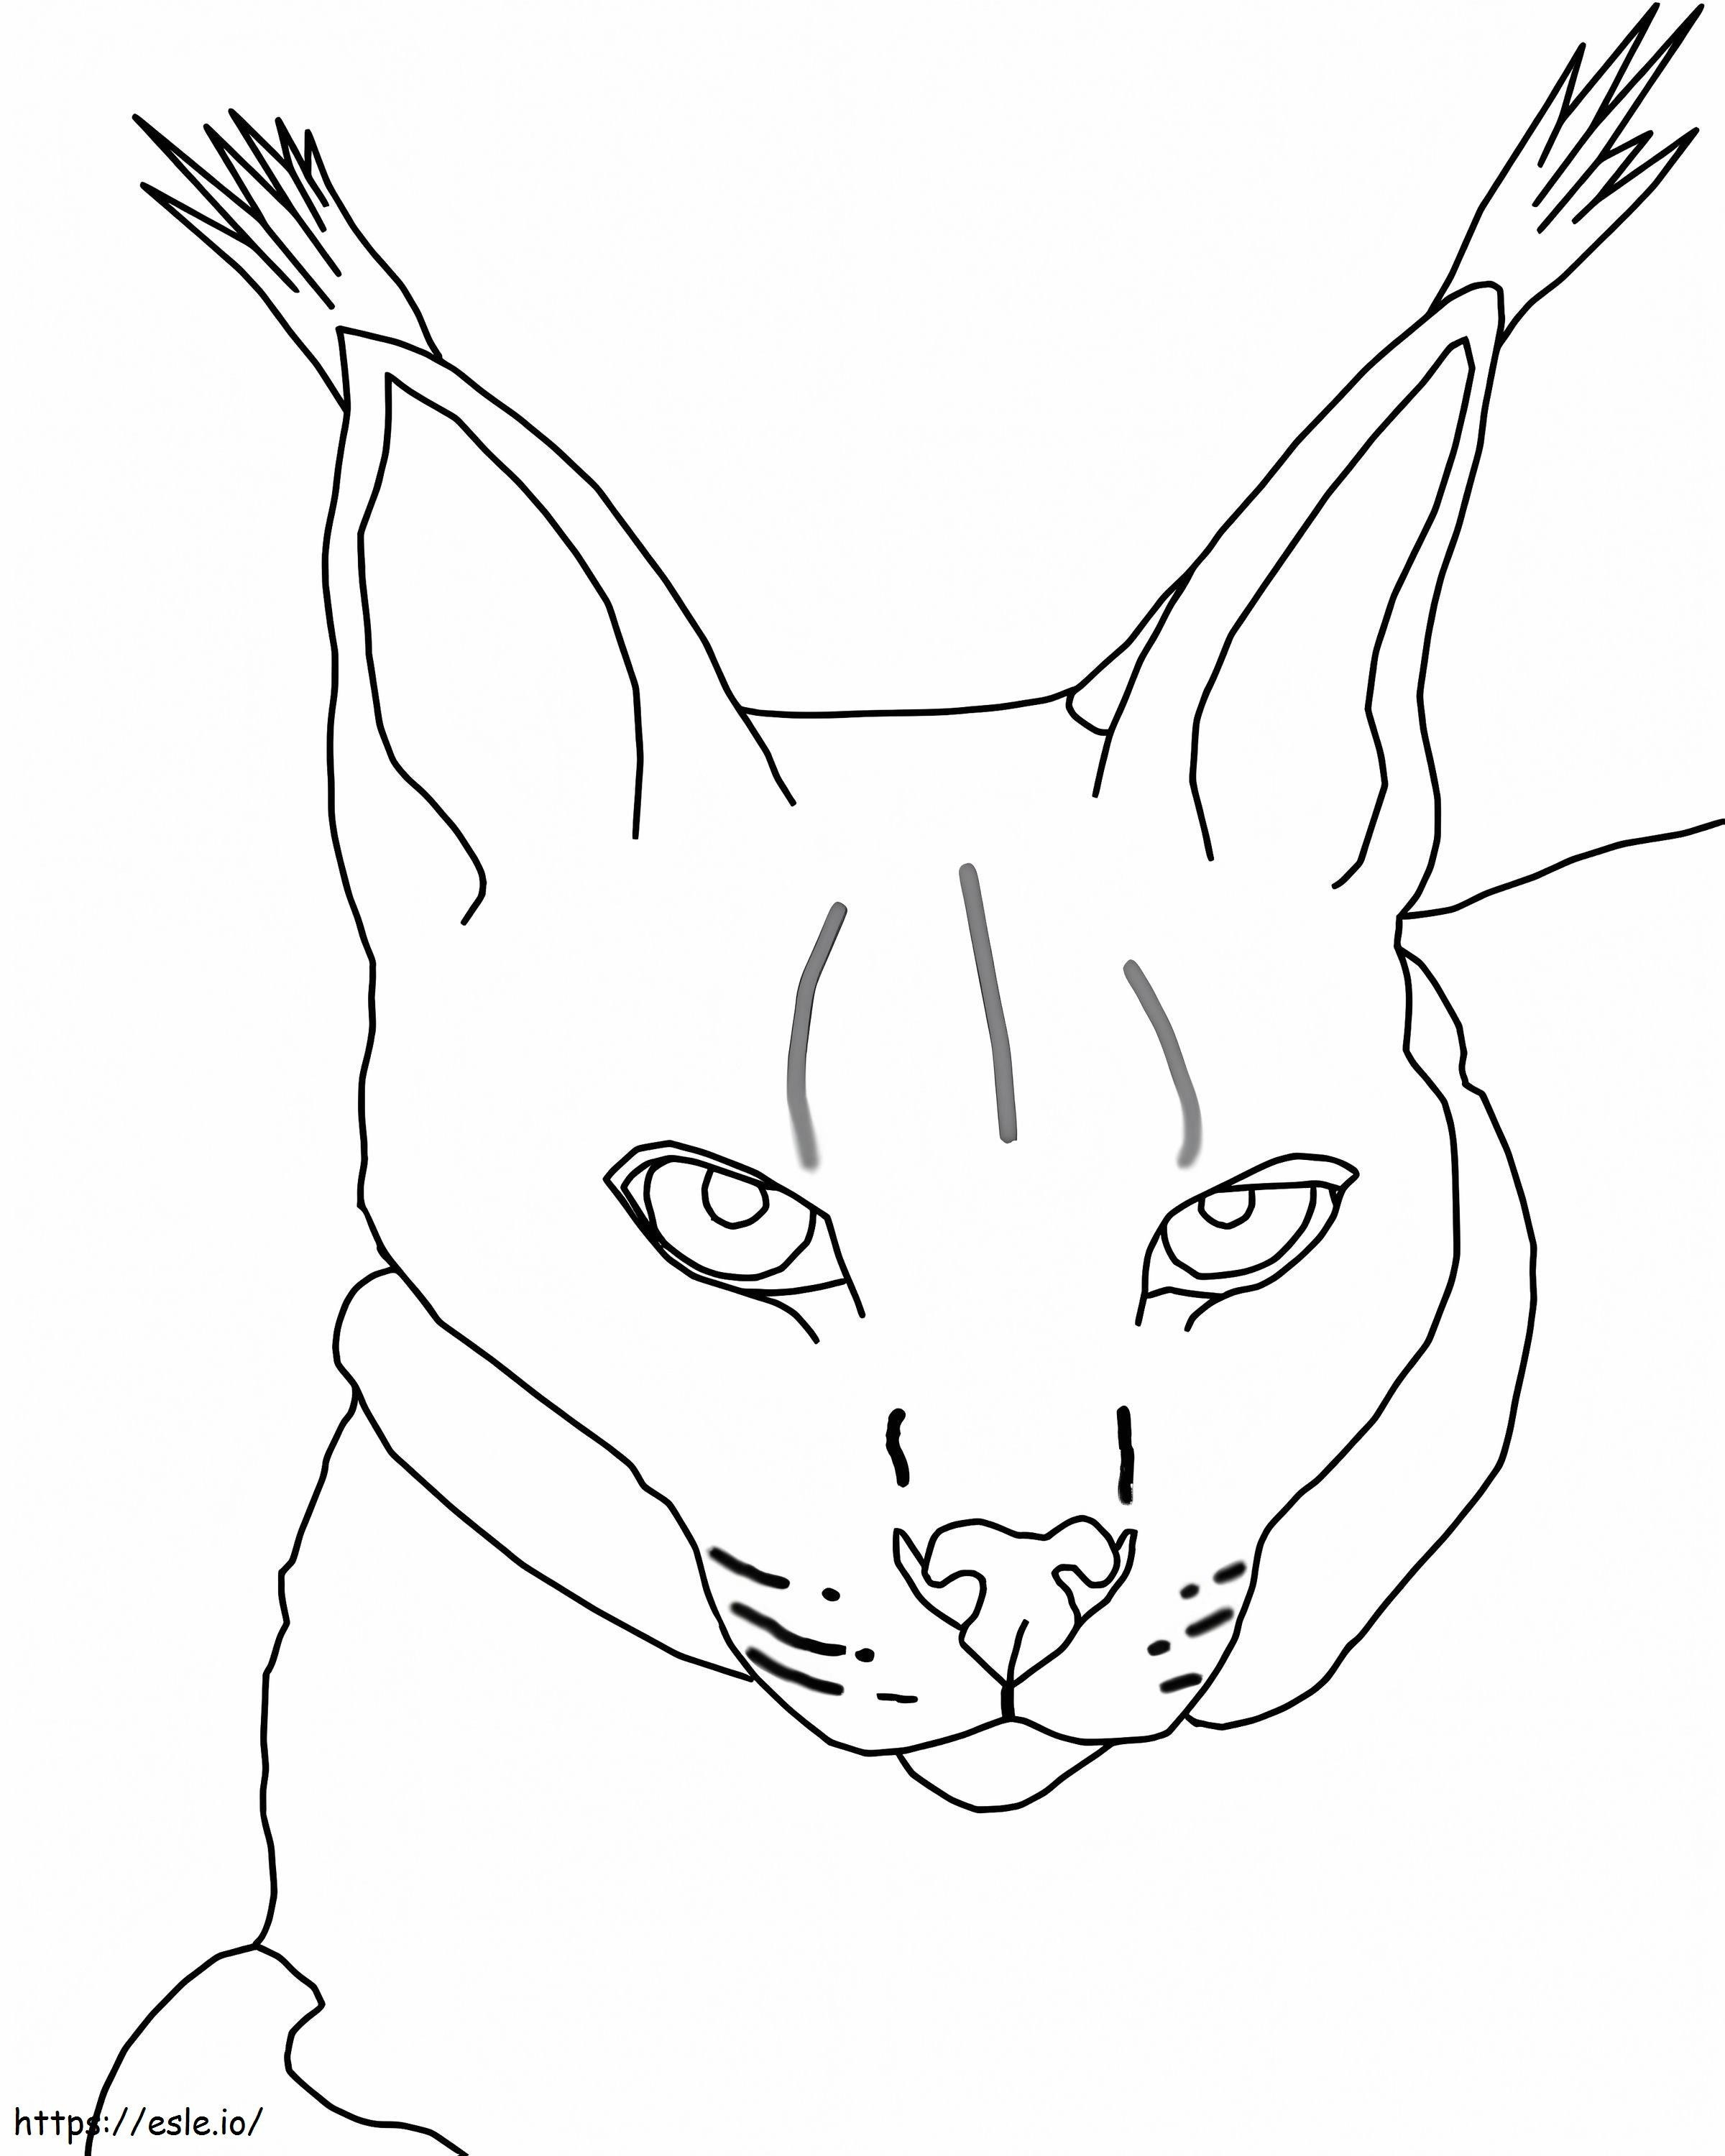 Great Lynx coloring page